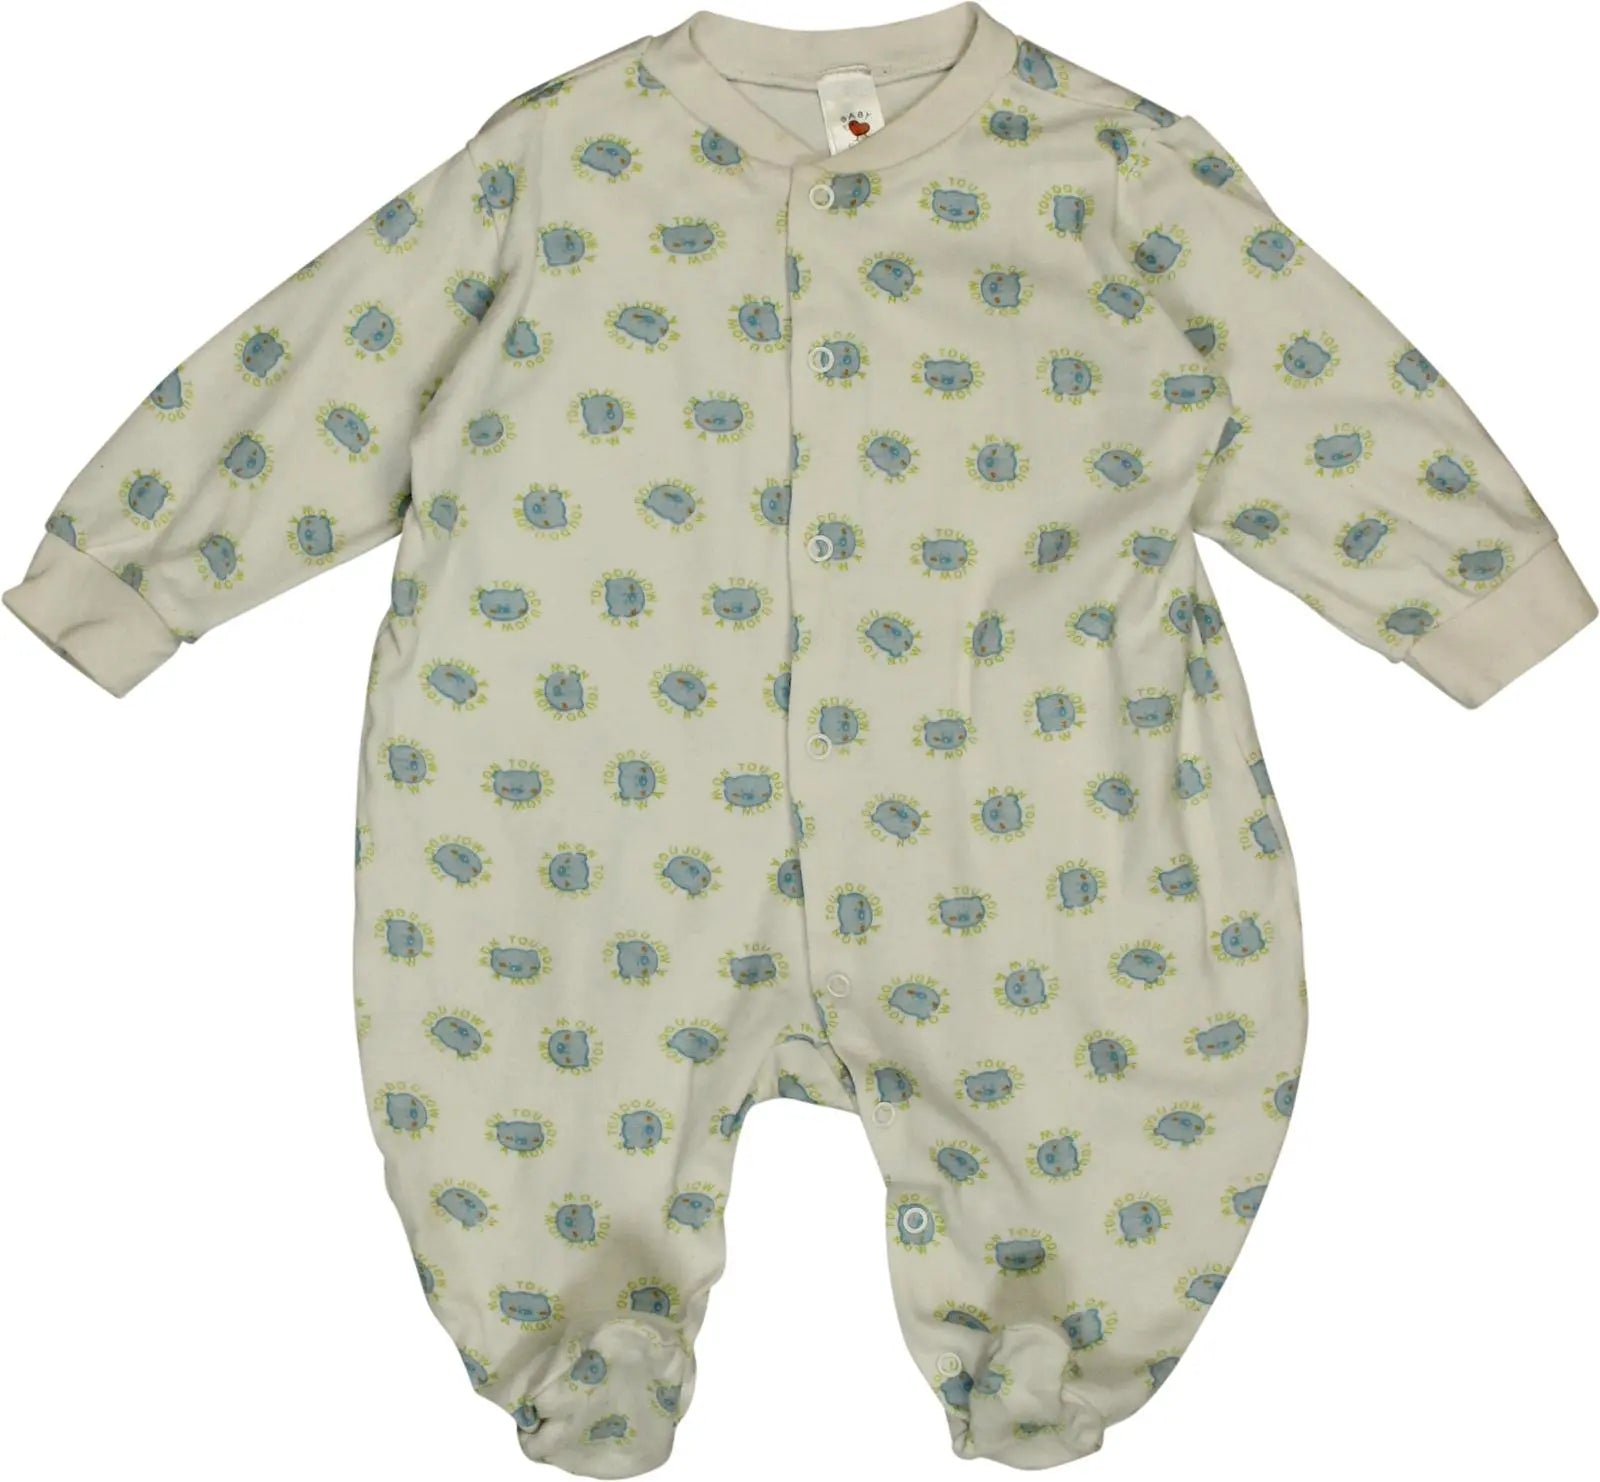 C&A - Sleepsuit- ThriftTale.com - Vintage and second handclothing